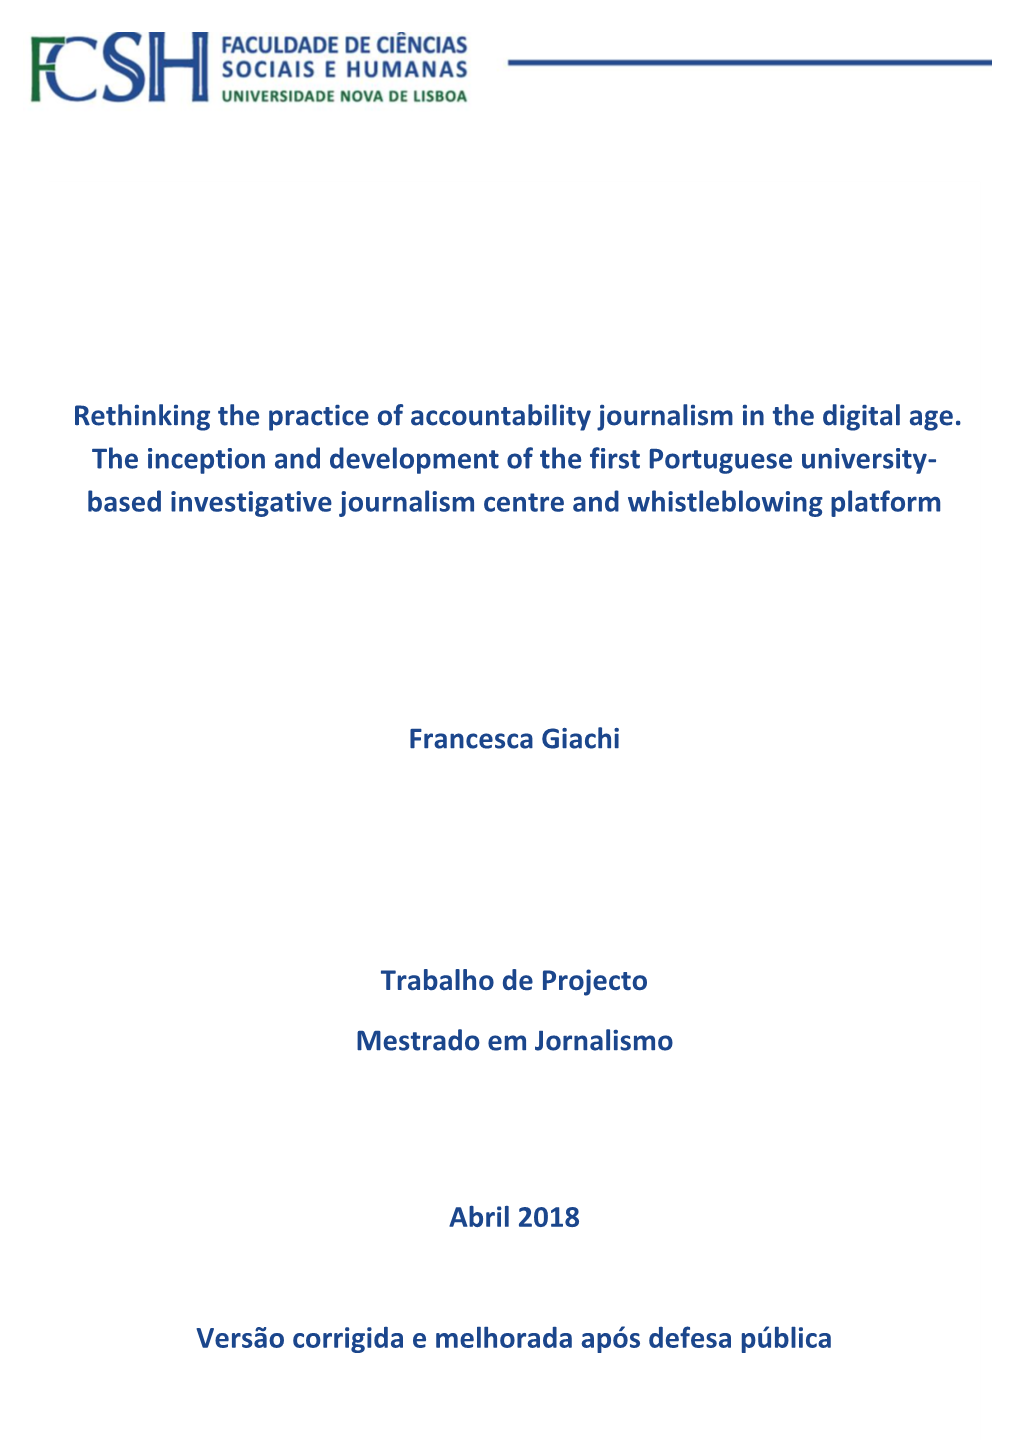 Rethinking the Practice of Accountability Journalism in the Digital Age. the Inception and Development of the First Portuguese U